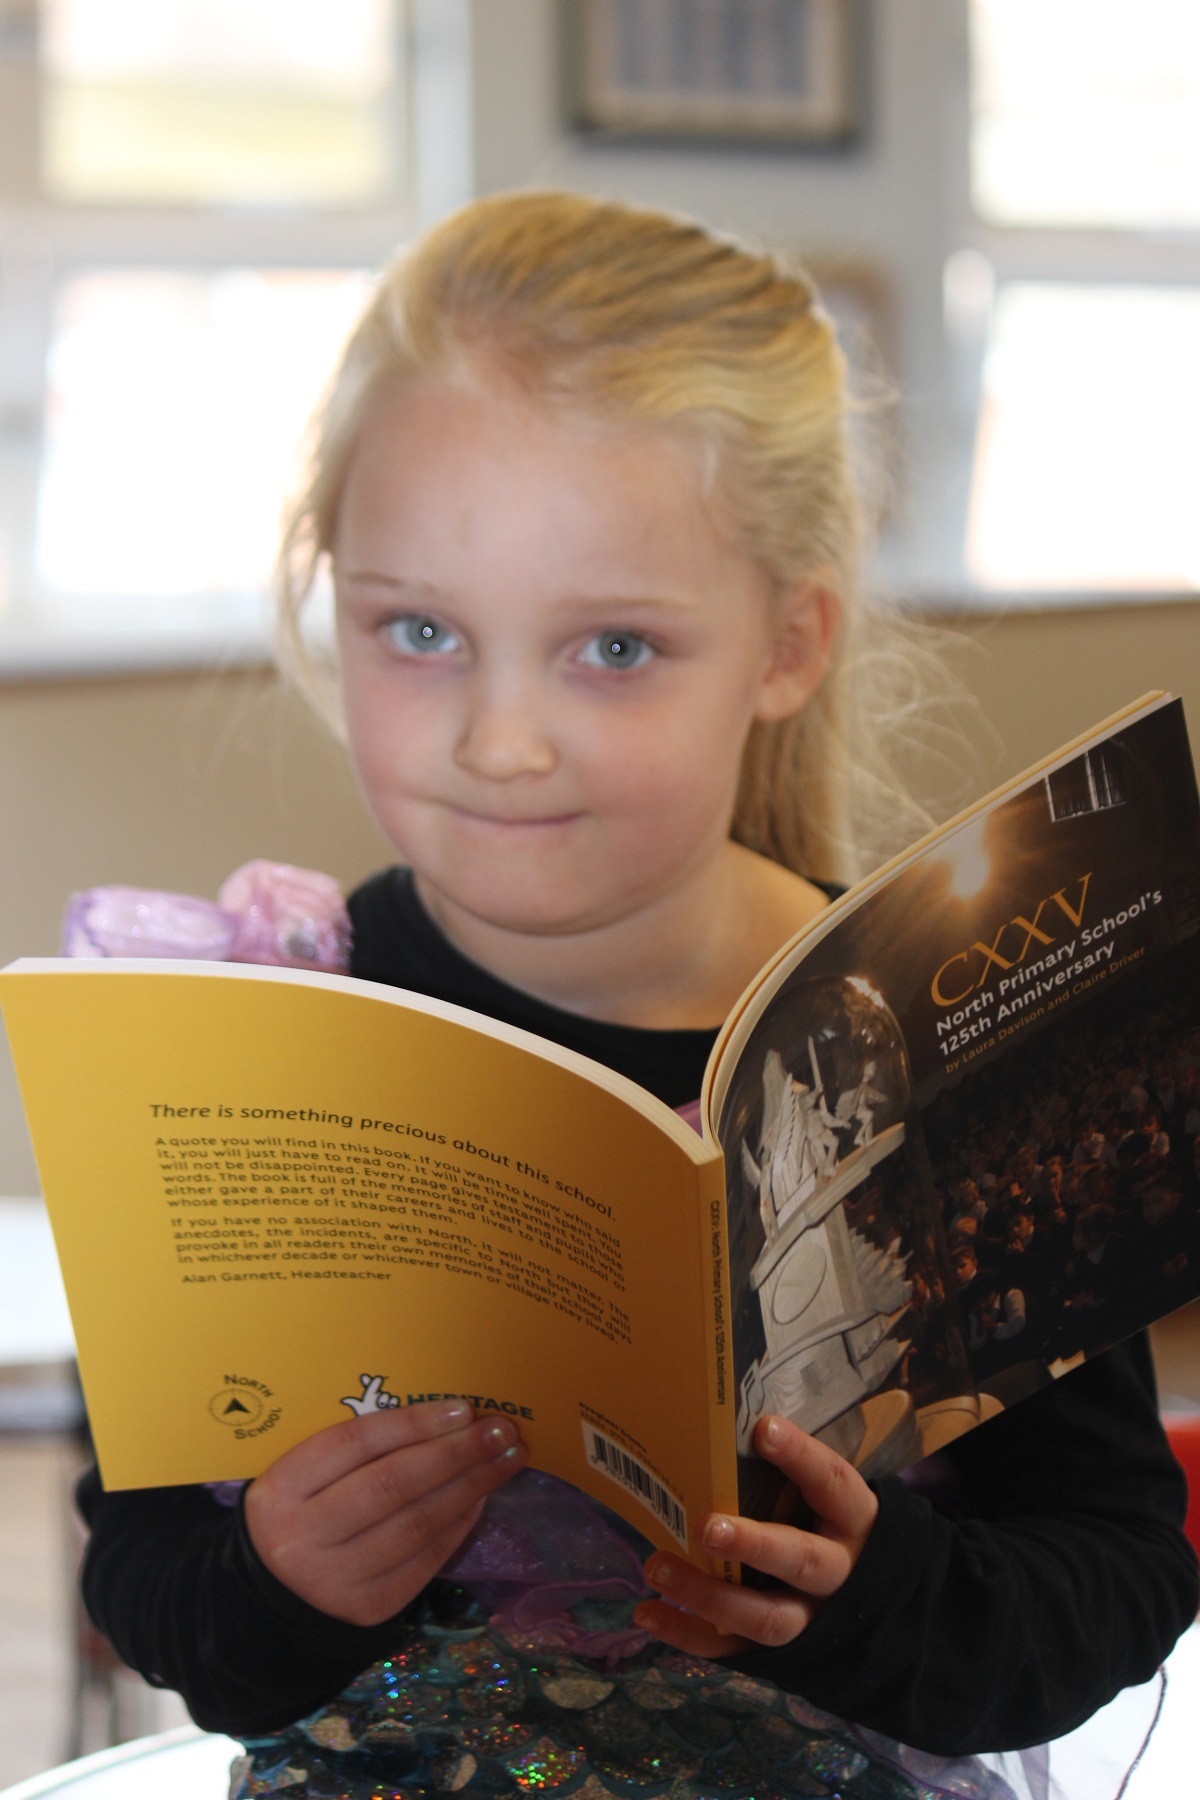 Important role - at a school birthday party in November 2019, Poppy Lynn was the youngest pupil in the school. She helped cut the cake with the oldest pupil. Their photo is in the book